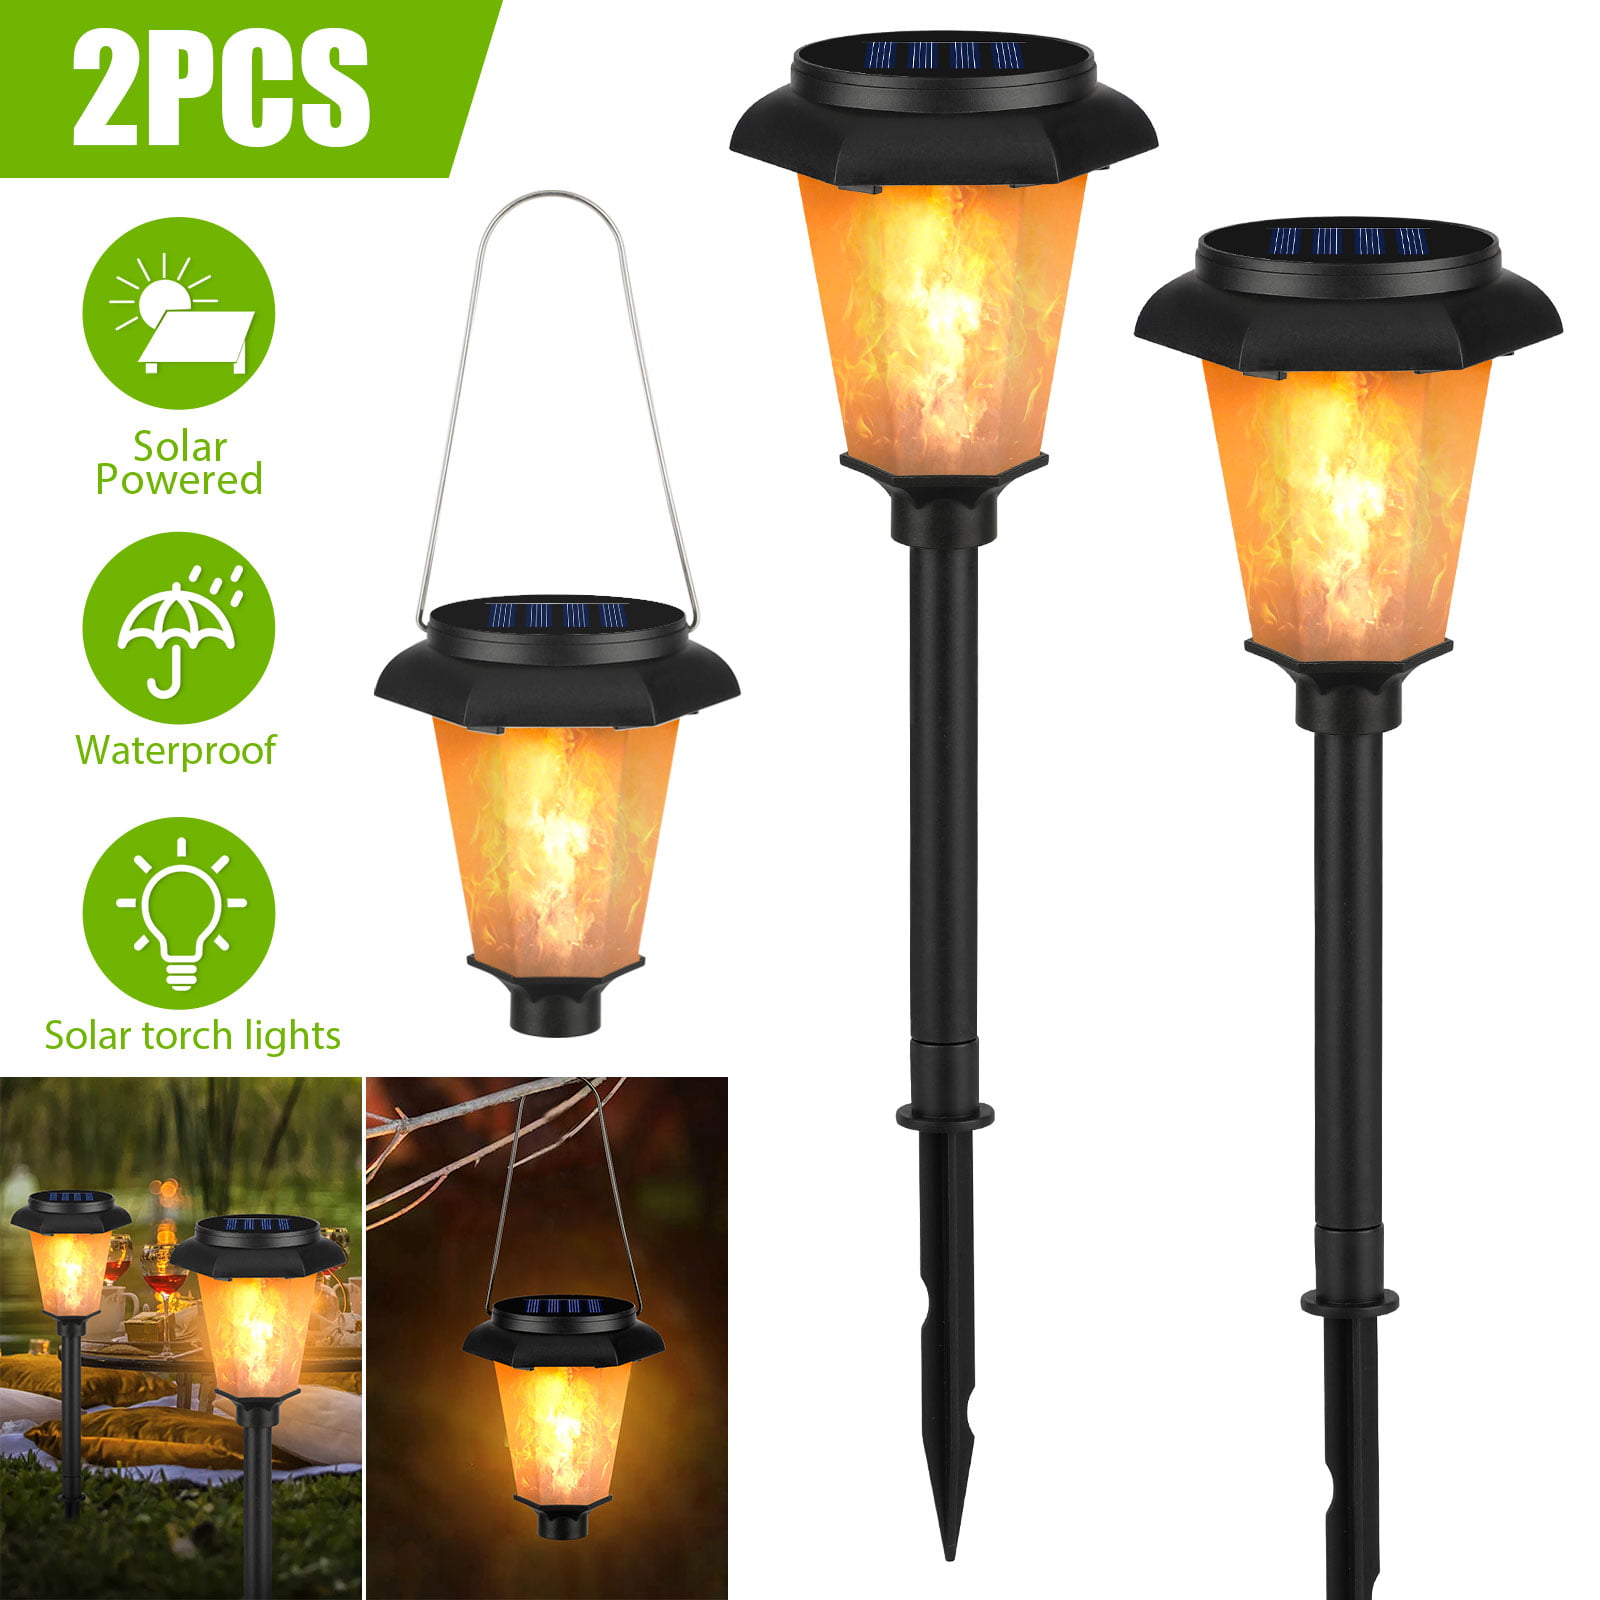 Pair of LED Solar Dock Light for Posts Auto On at Dusk and Off at Dawn 